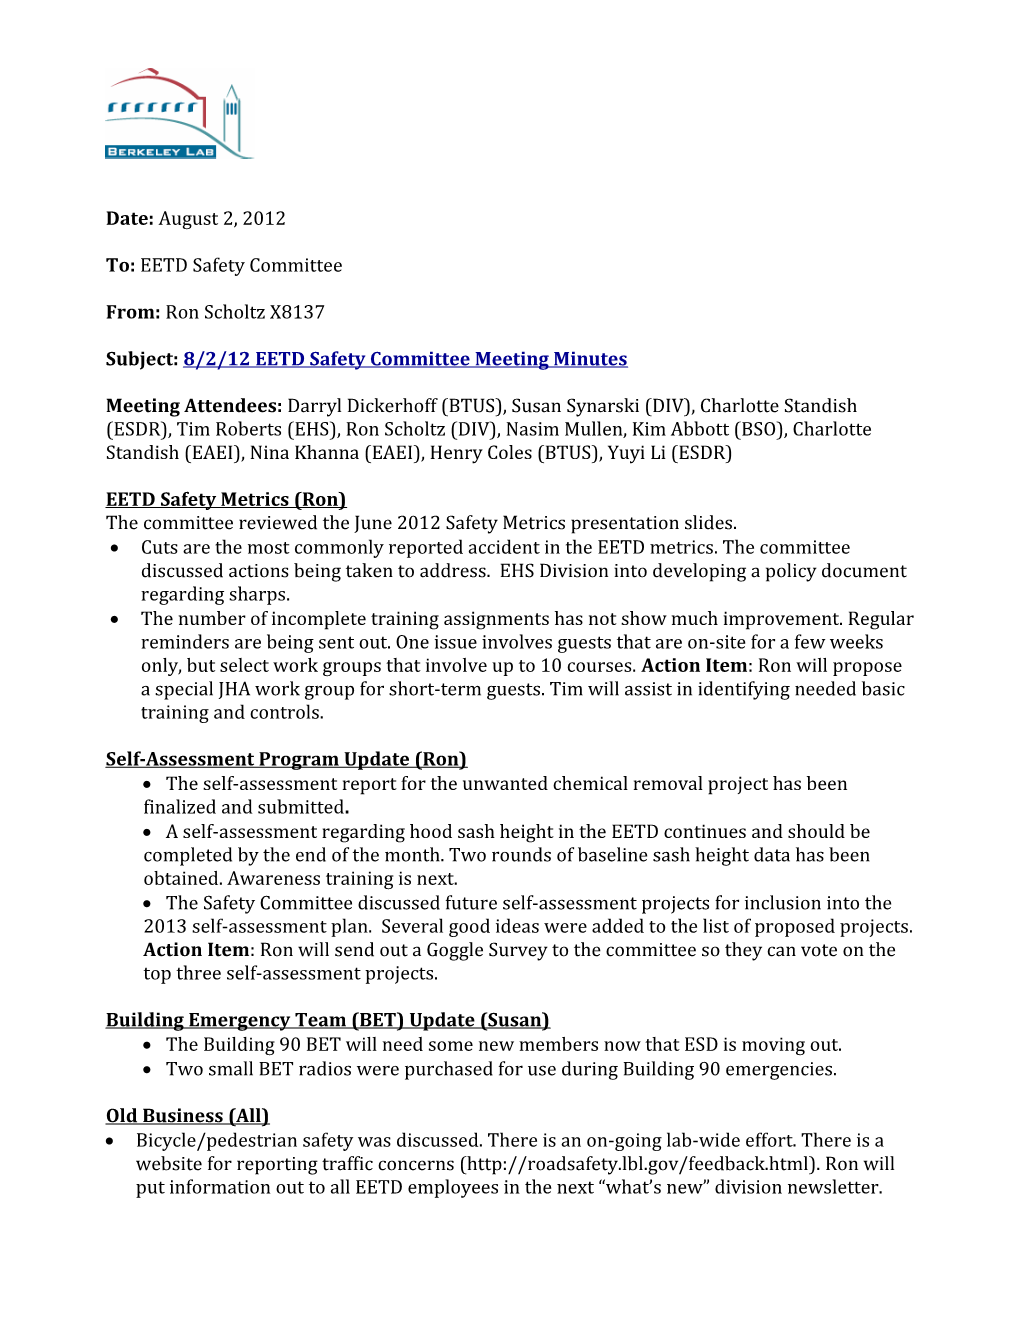 Subject:8/2/12 EETD Safety Committee Meeting Minutes